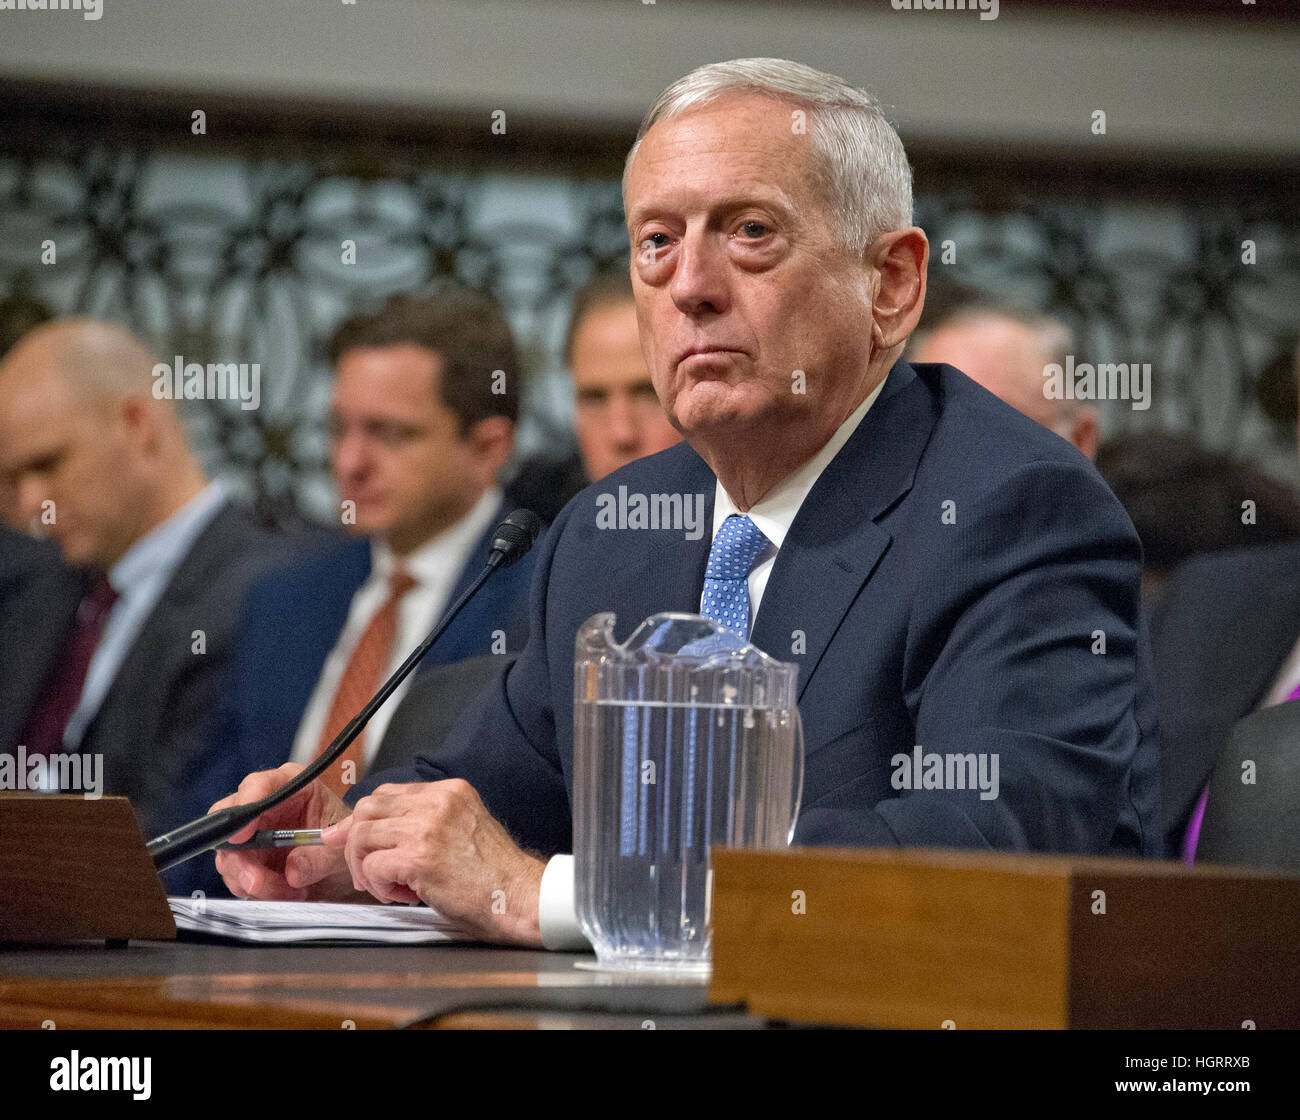 Washington DC, USA. 12th January 2017. United States Marine Corps General James N. Mattis (retired) testifies before the US Senate Committee on Armed Services during his confirmation hearing to be Secretary of Defense on Capitol Hill in Washington, DC on Thursday, January 12, 2017. Credit: MediaPunch Inc/Alamy Live News Stock Photo